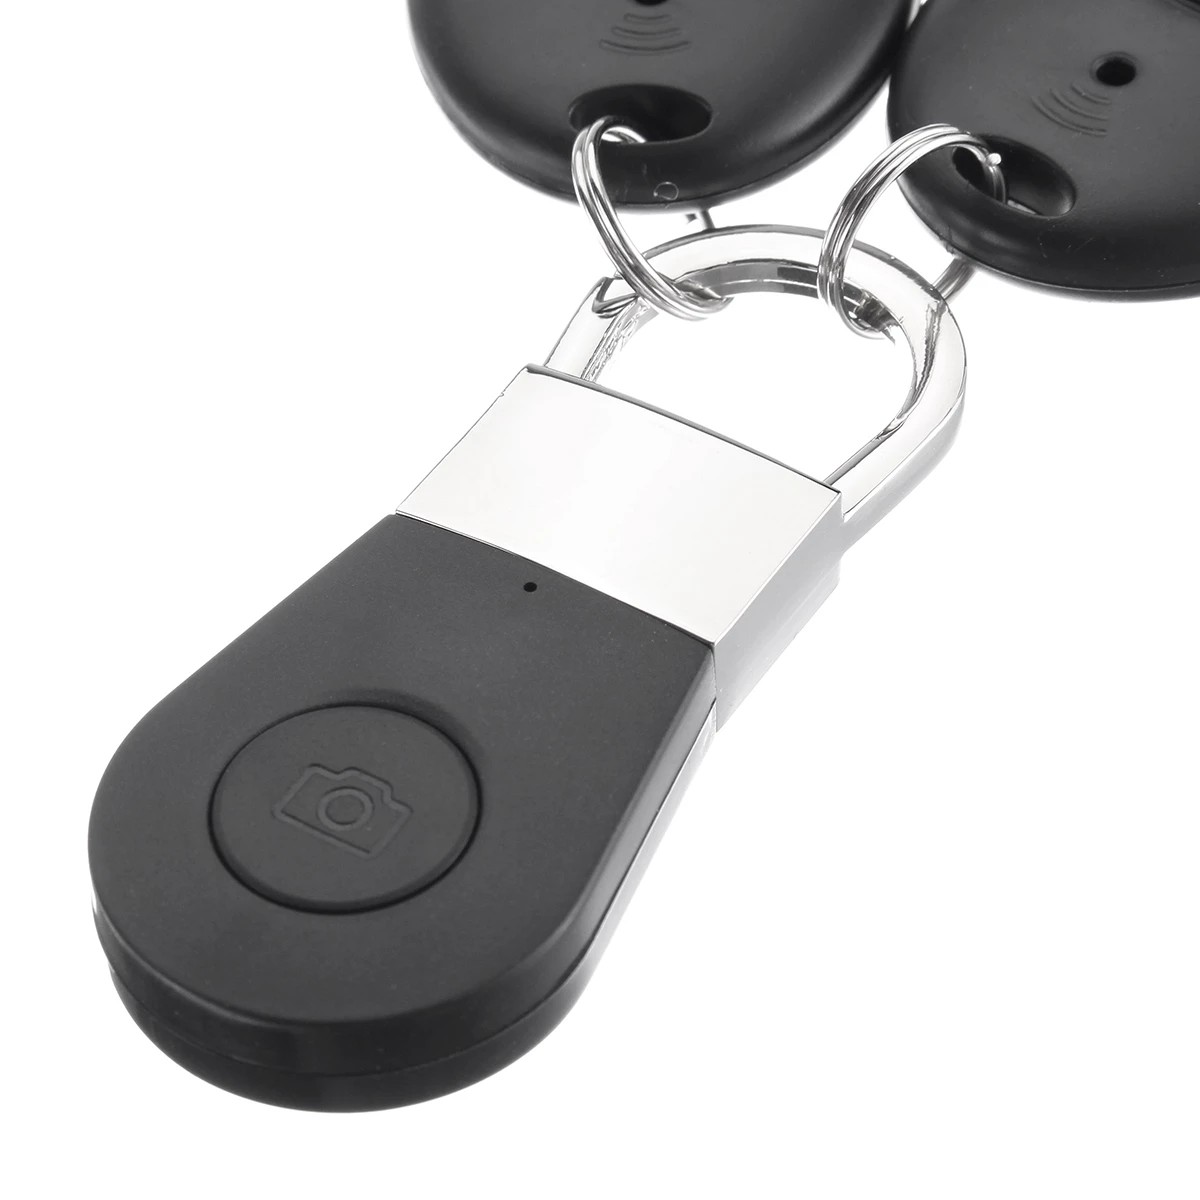 bluetooth tracker - key finder with GPS location